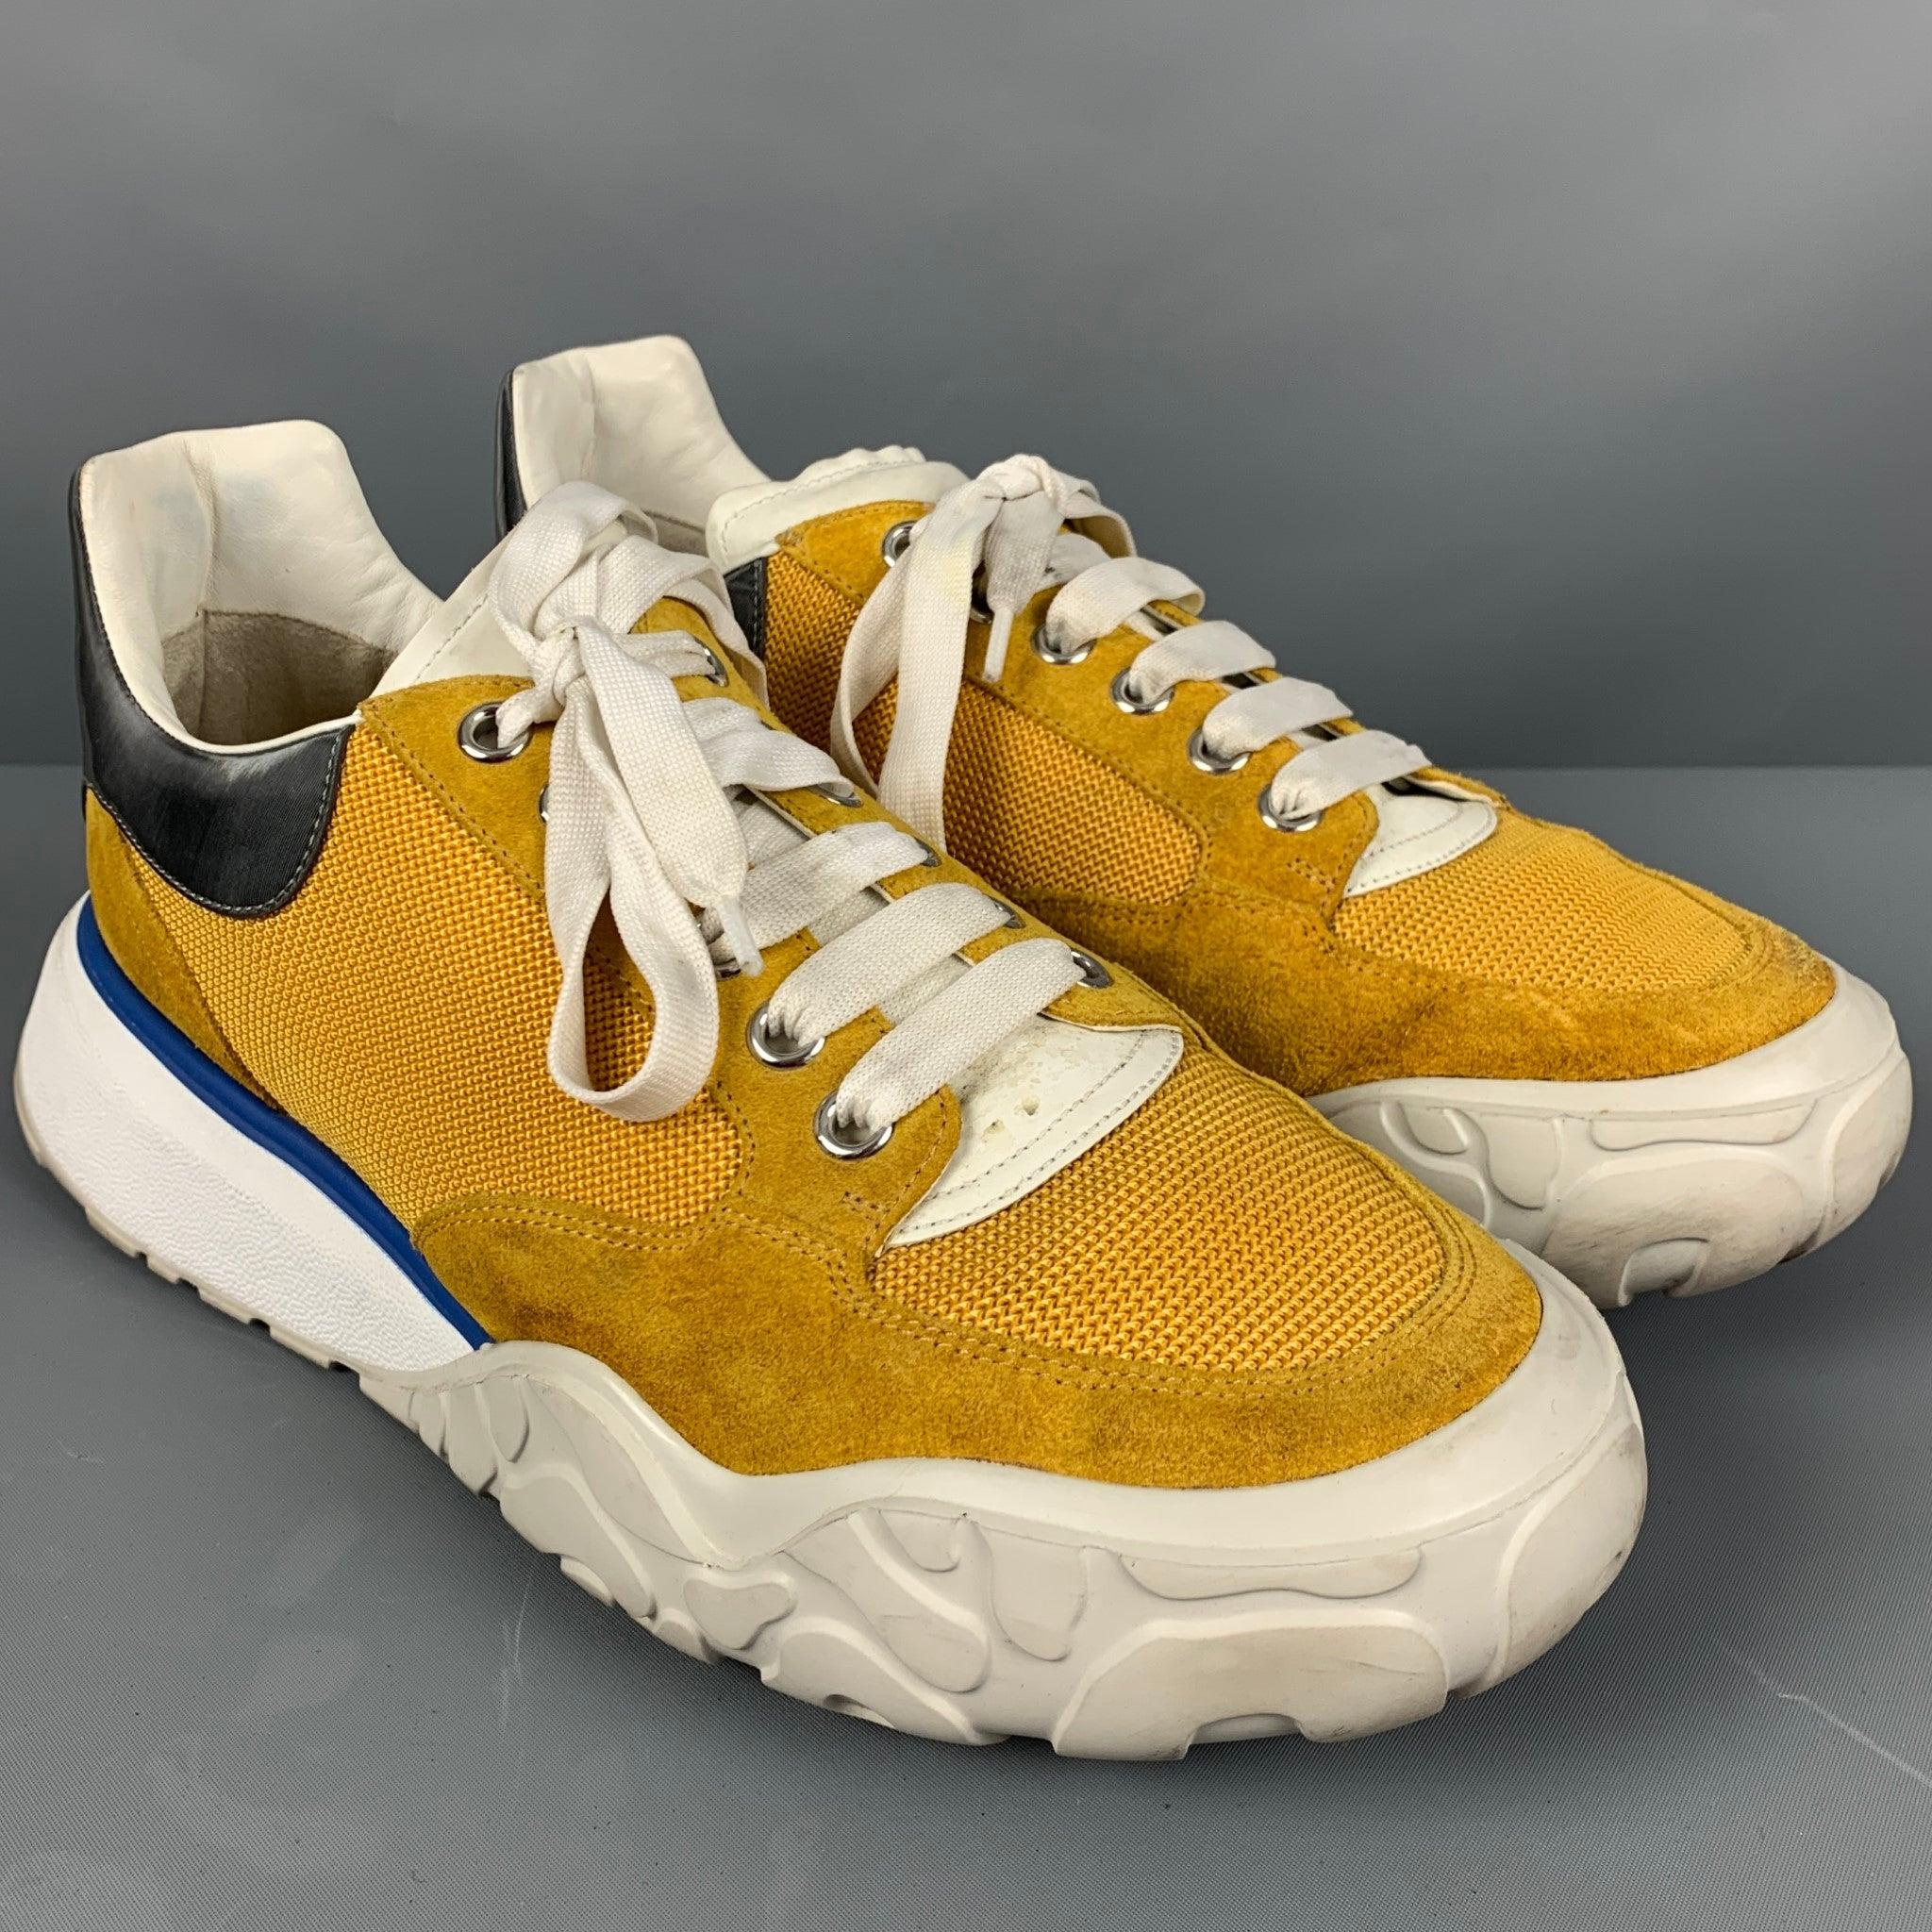 ALEXANDER MCQUEEN sneakers
in a yellow nylon fabric featuring color block style, yellow suede trim, and grey heel detail.Good Pre-Owned Condition. Missing insole. As-is. 

Marked:   711127 44 JOutsole:13.25 inches  x 4.5 inches 
  
  
 
Reference: